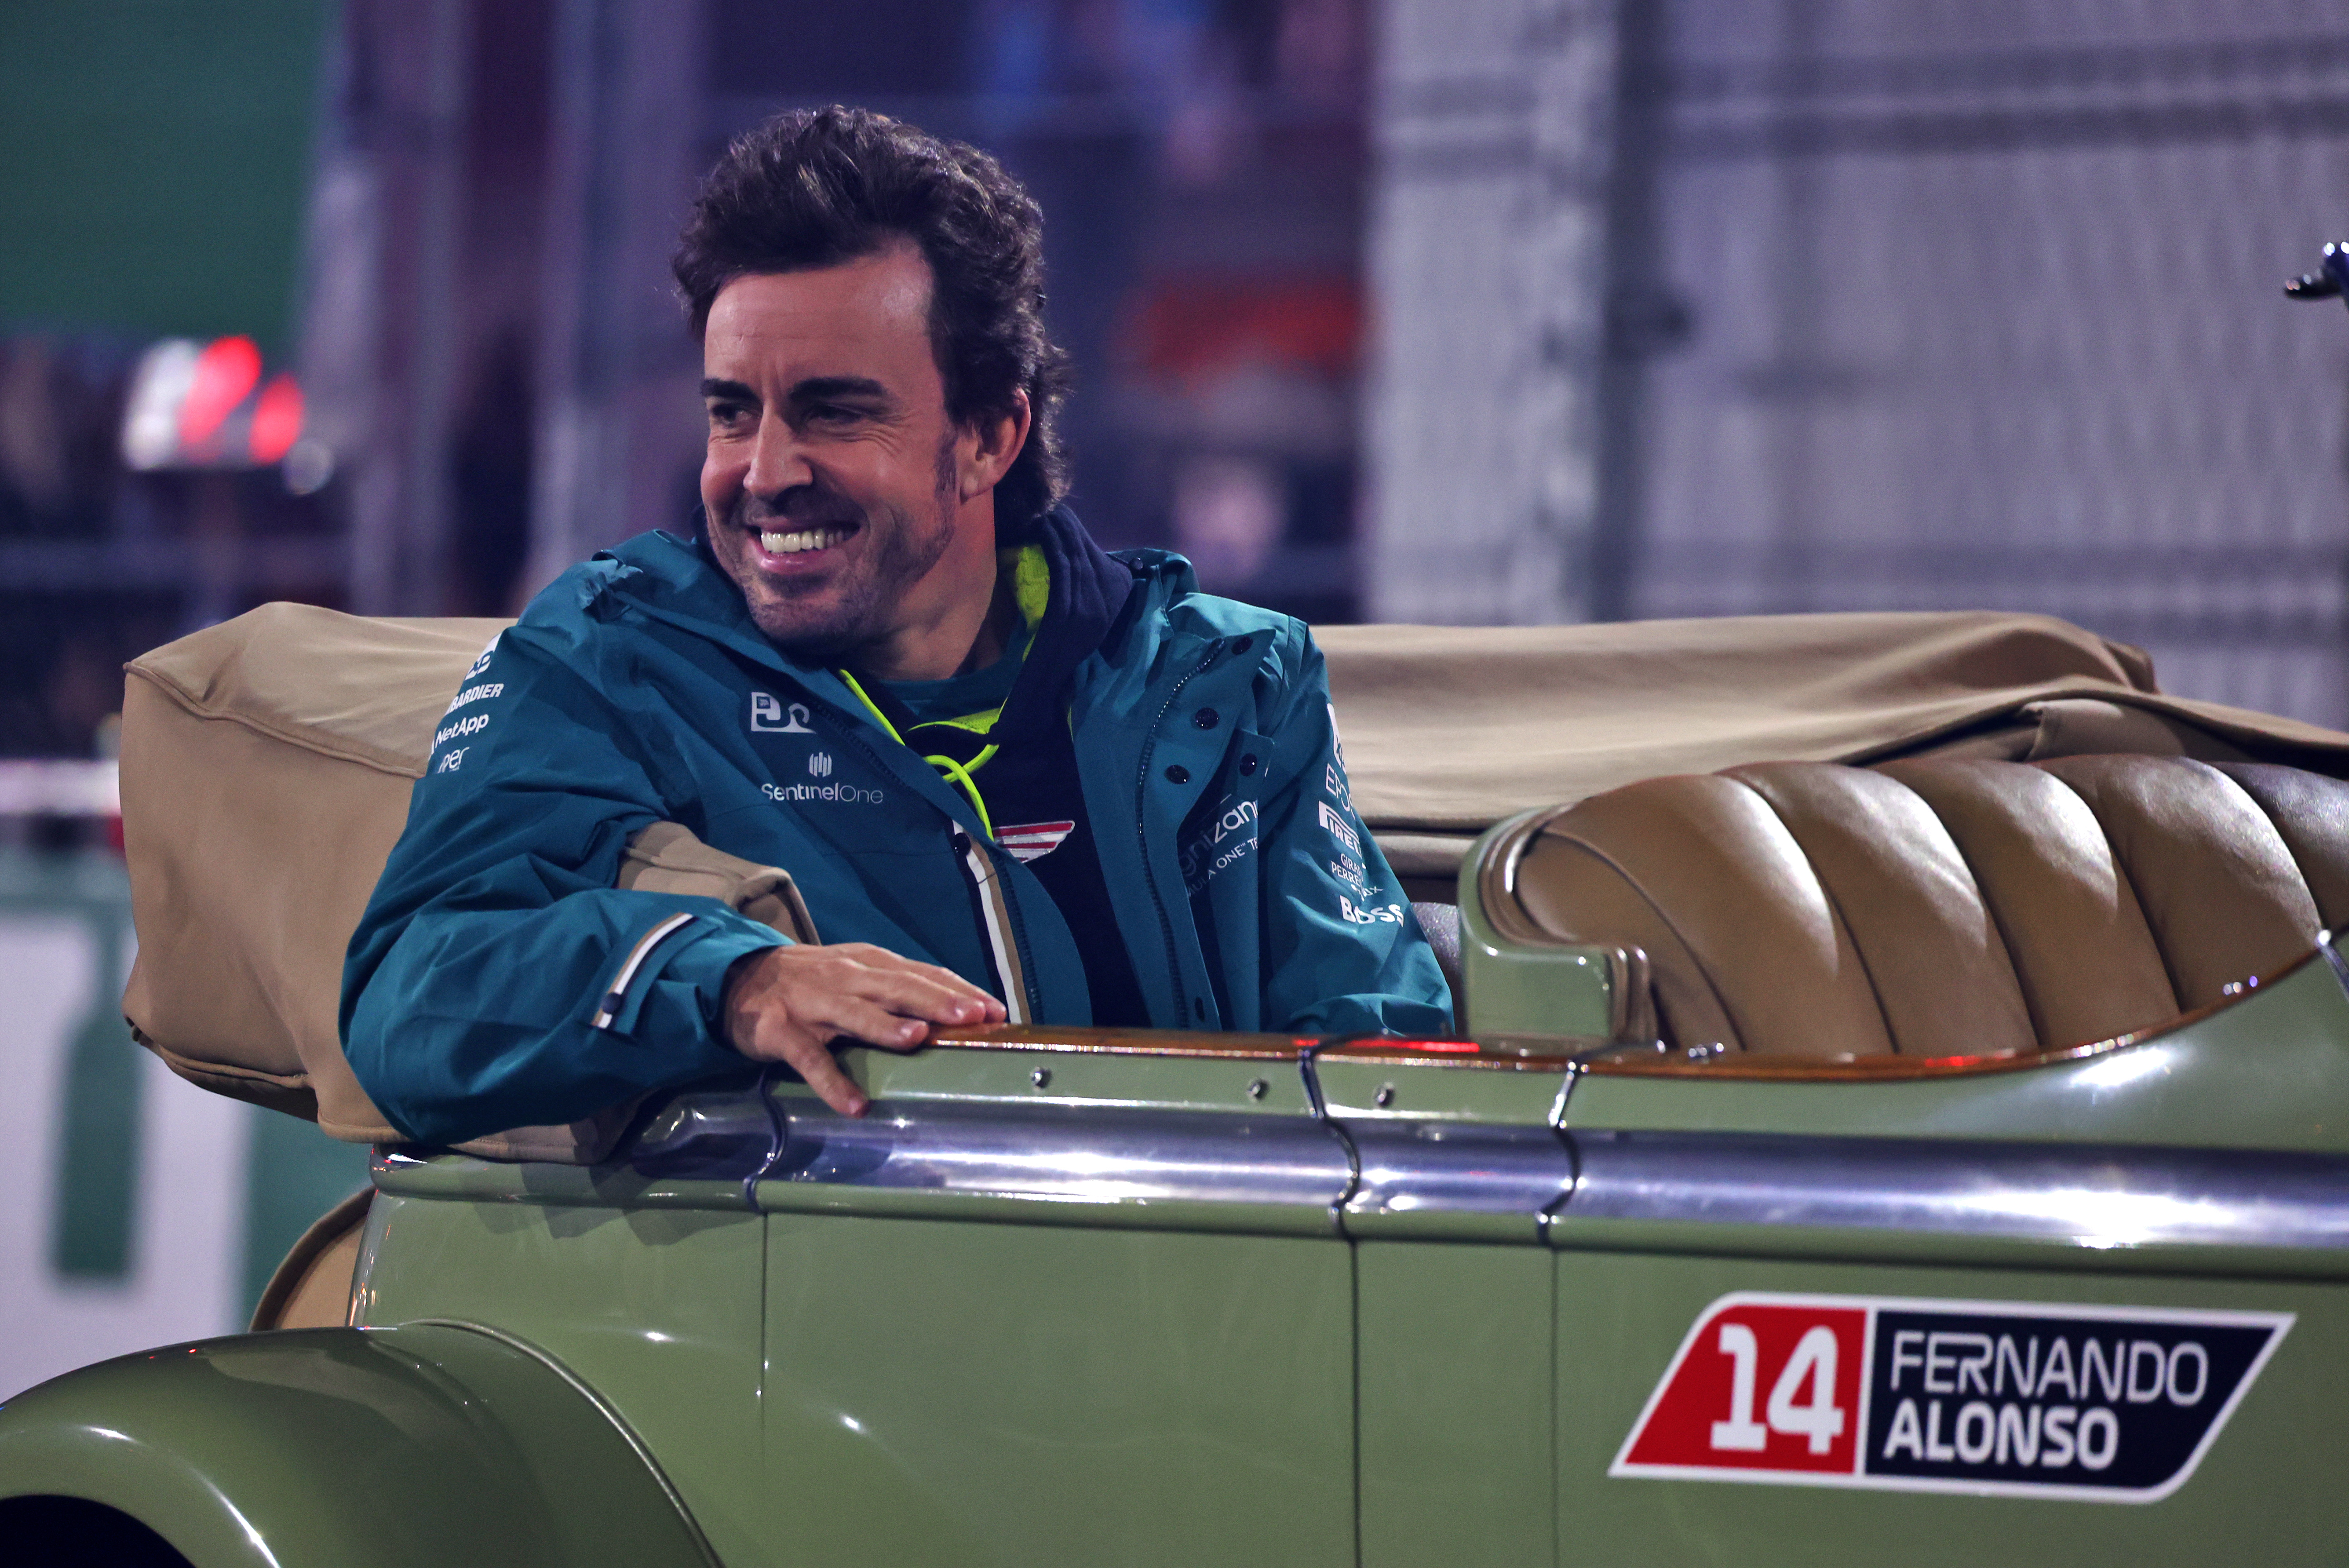 Fernando Alonso in love again: 'There's no hiding something like that